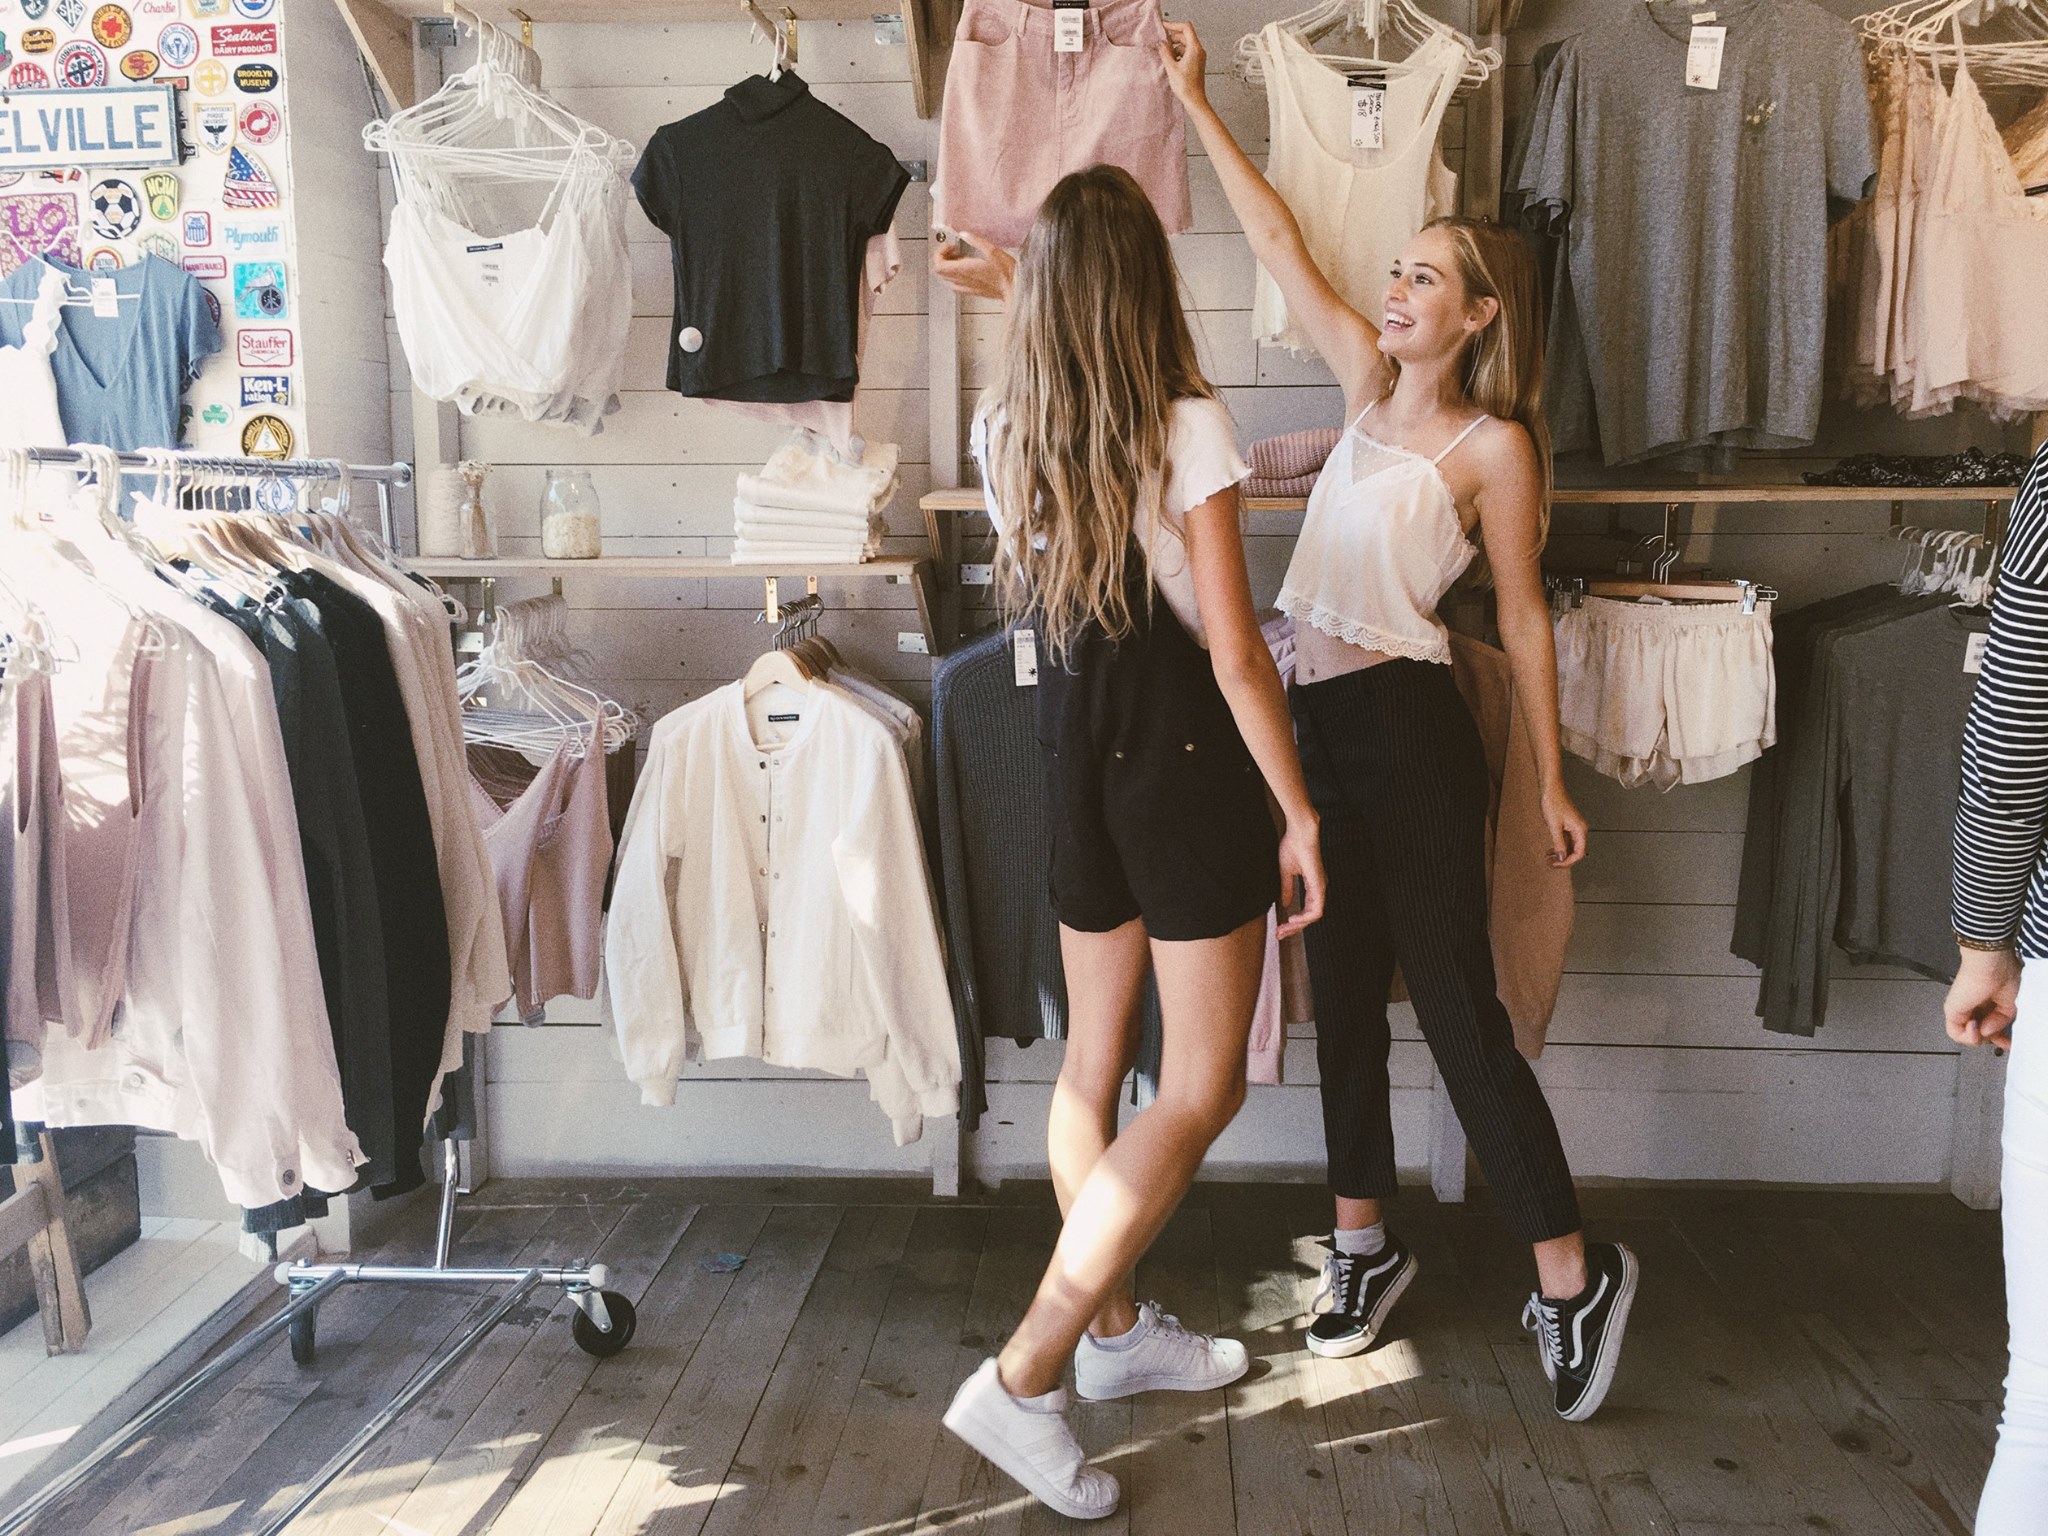 Brandy Melville accused of racism and fat shaming - Thred Website